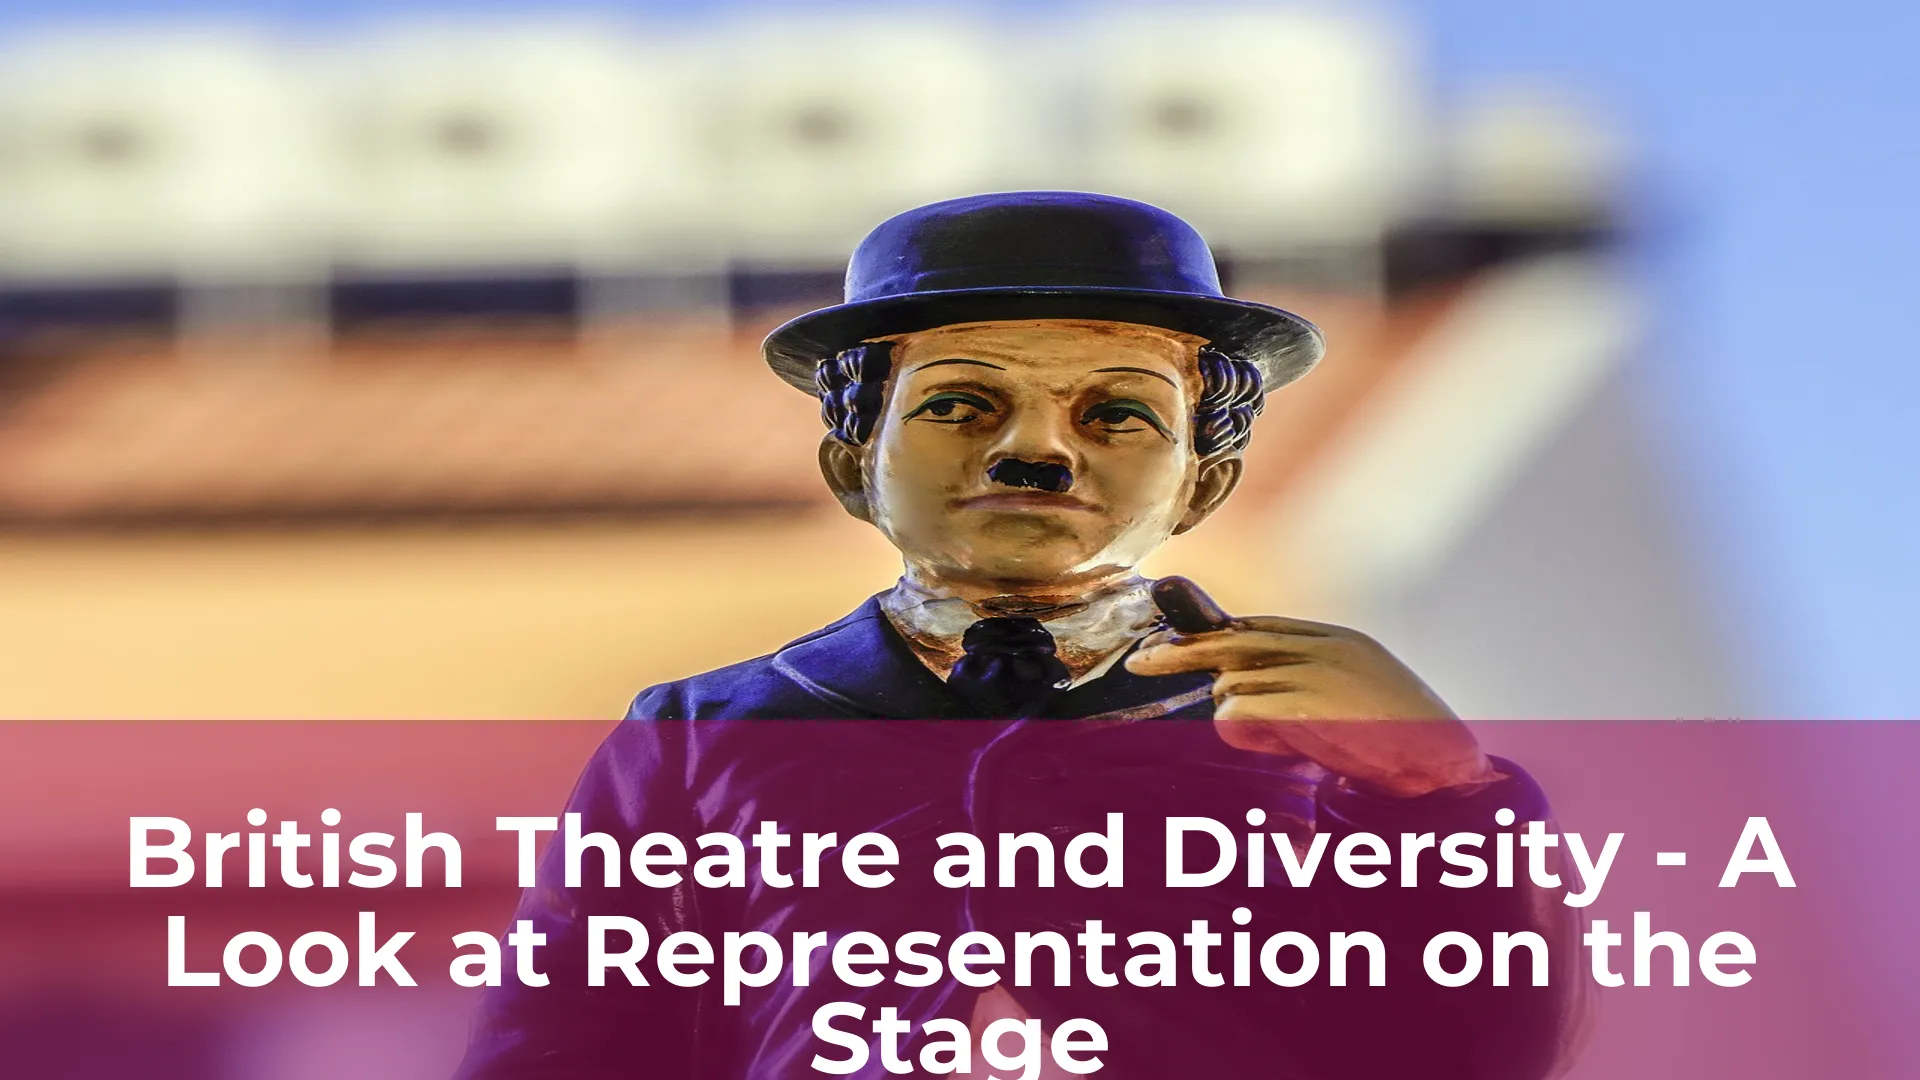 British theatre and diversity a look at representation on the stage